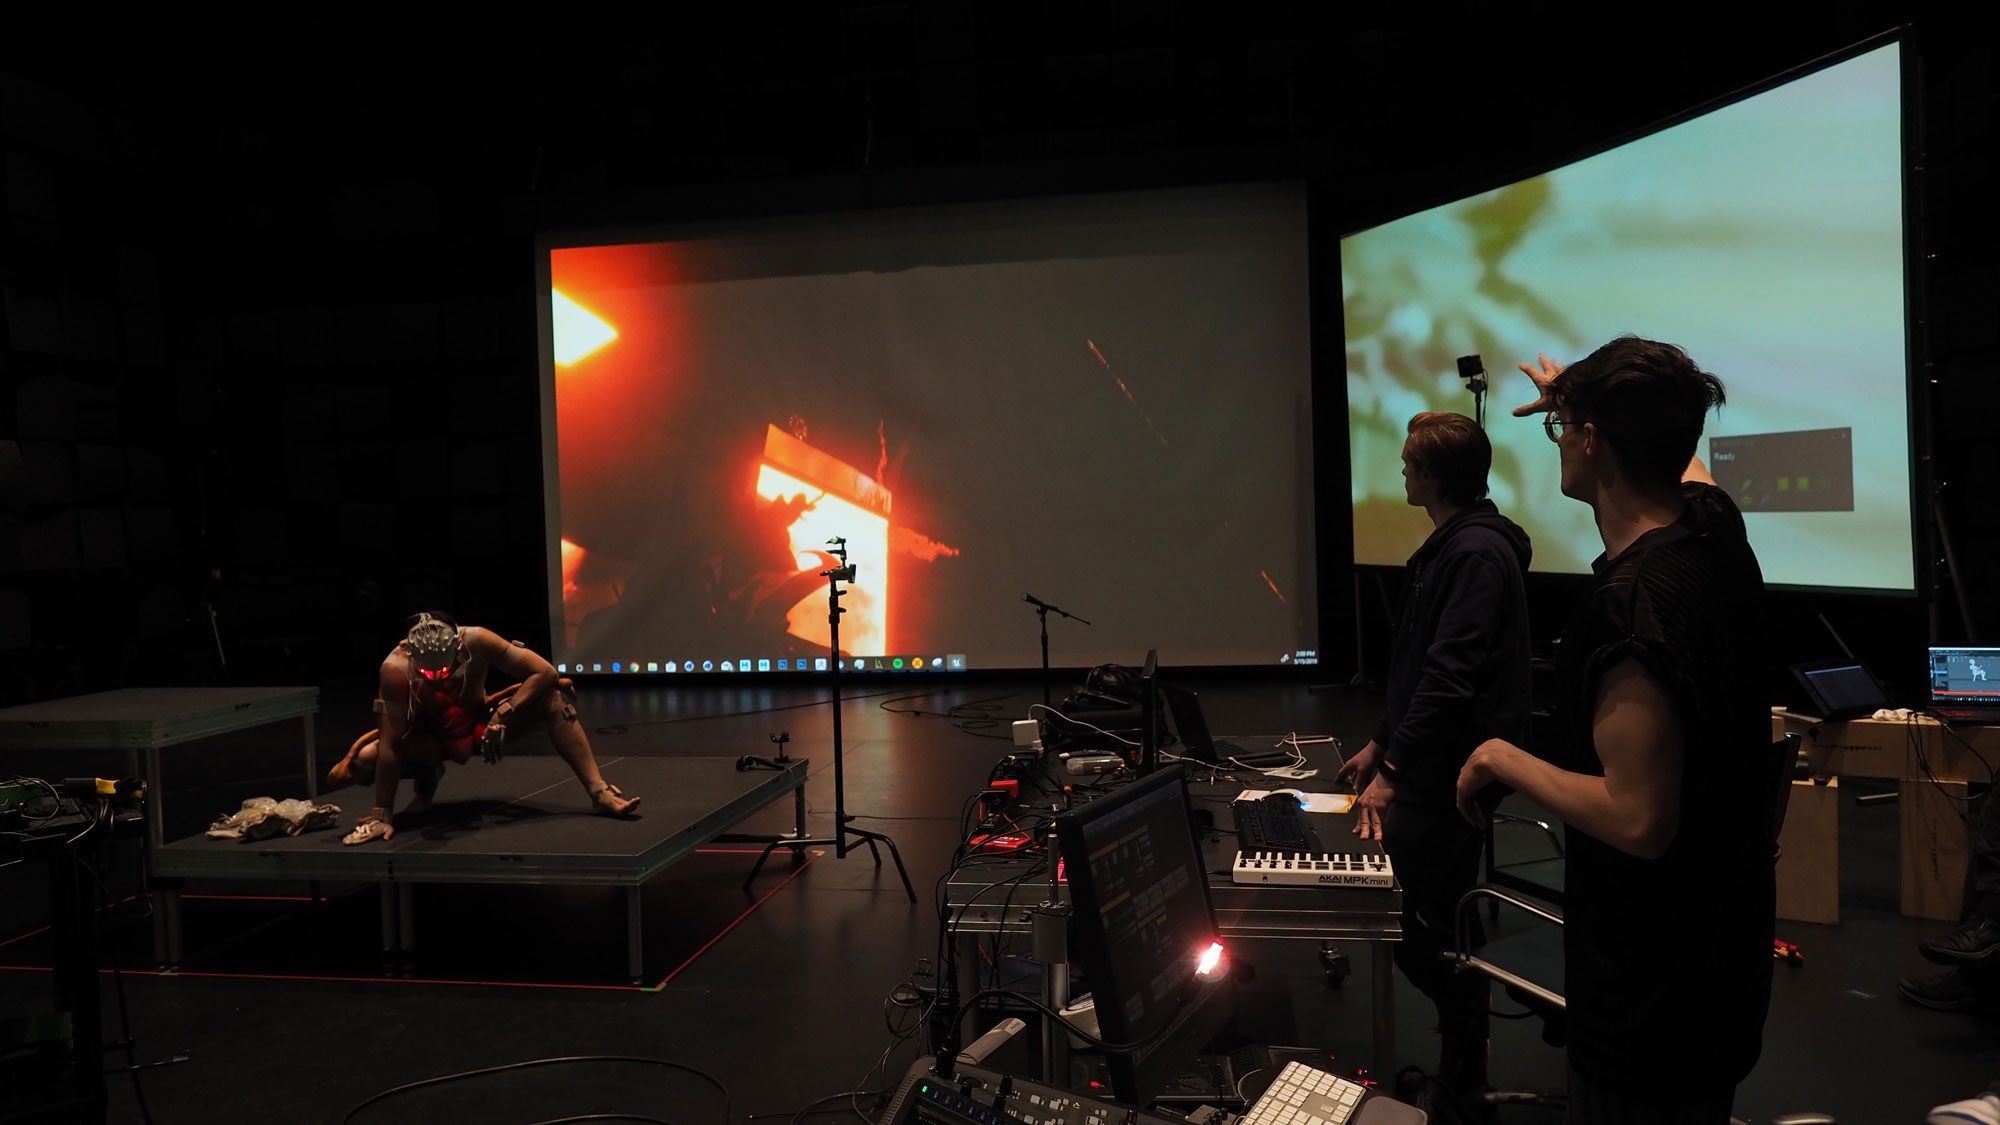 Justin Shoulder working with a dancer with multiple sensors attached to them in front of two large projection screens in black box studio.